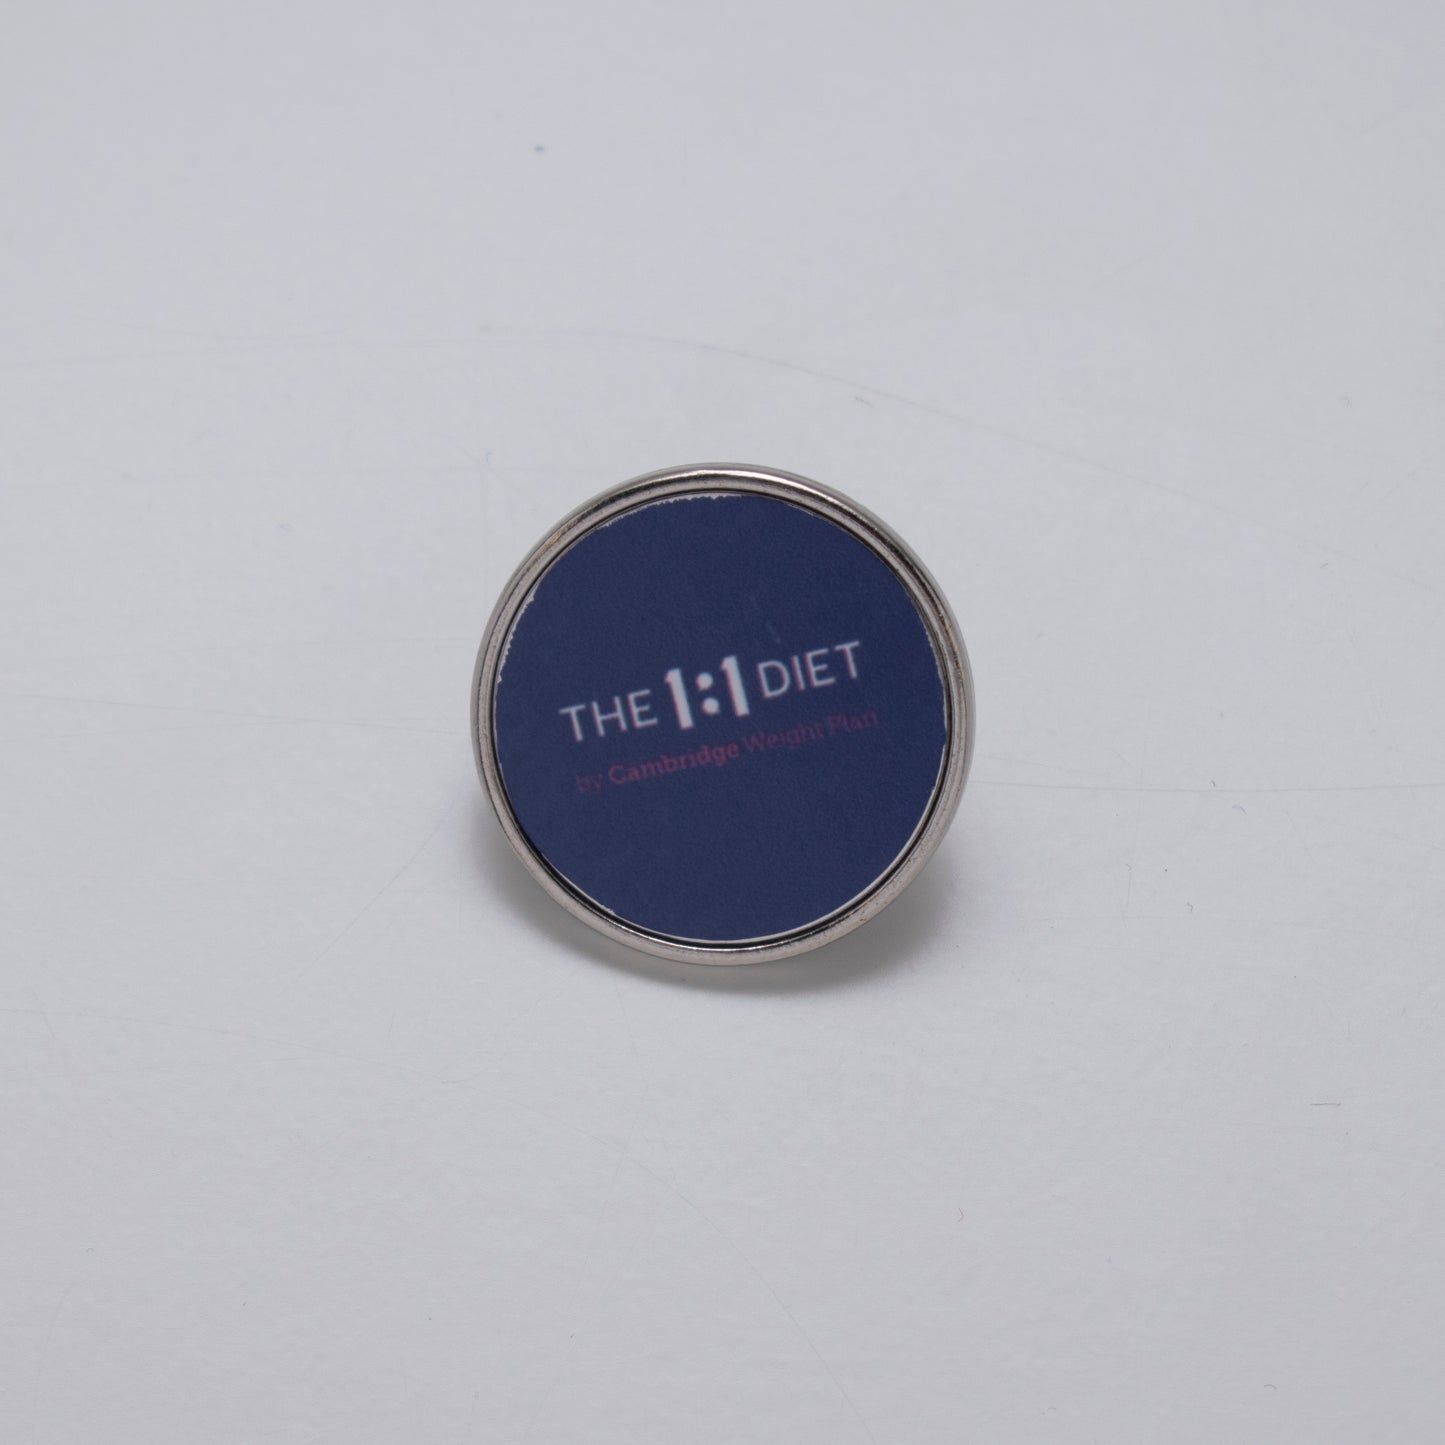 The 1:1 Diet - Pin Badge